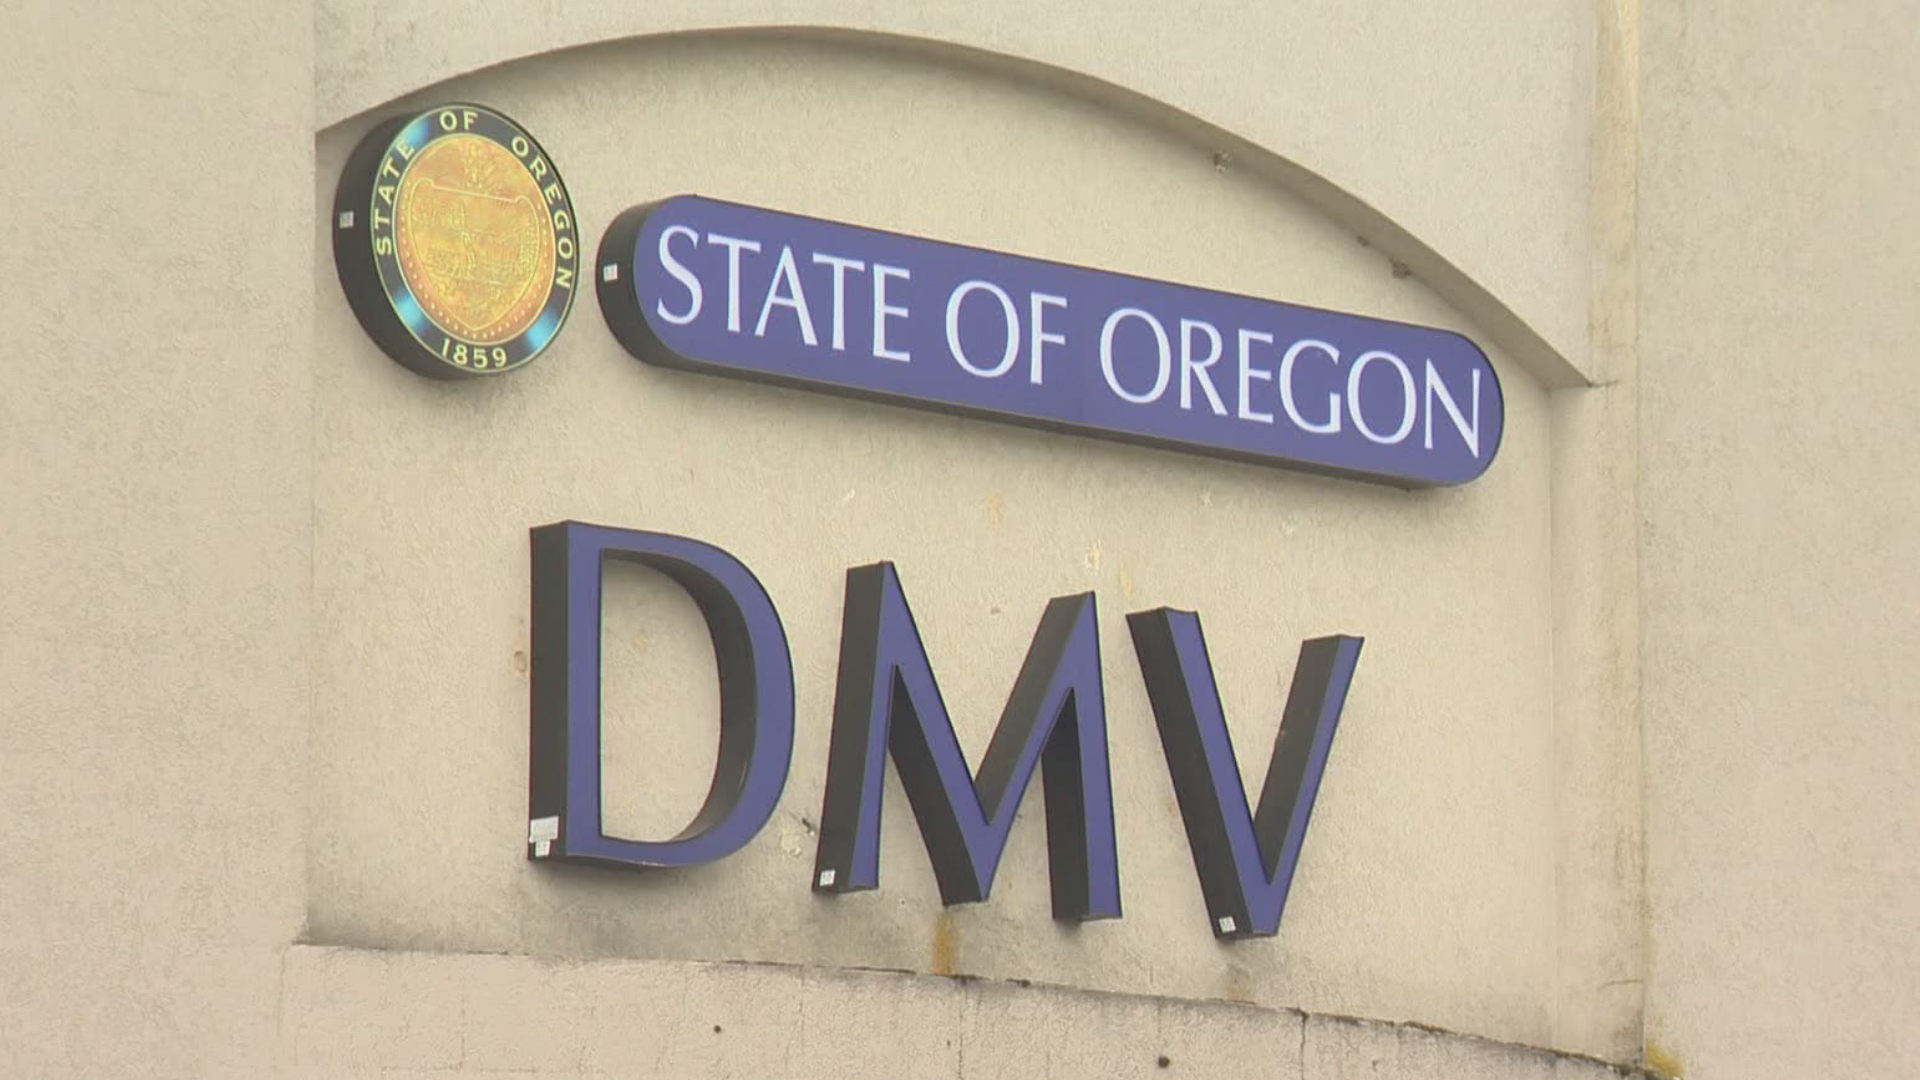 DMV field offices across the state have been closed since March. It is not clear when they will re-open.